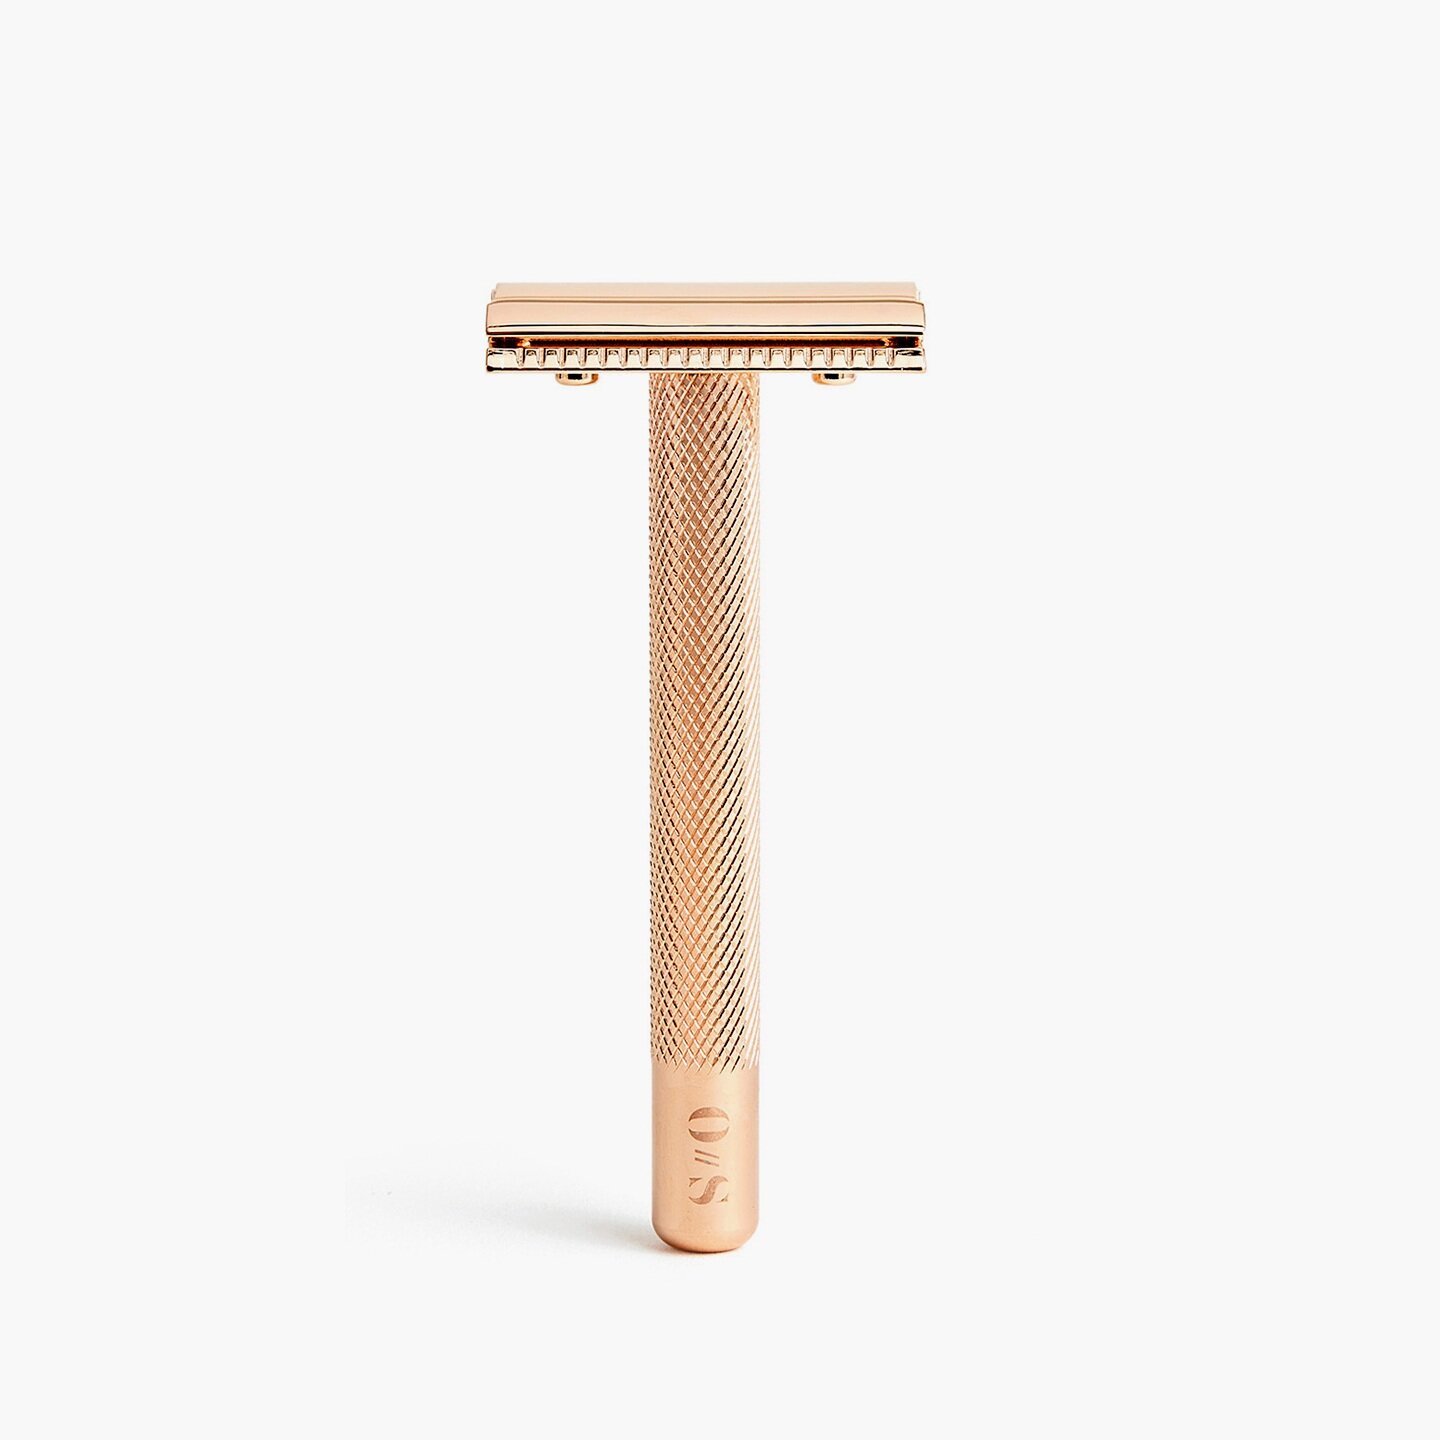 Oui-Shave_Razor_2048x2048.png